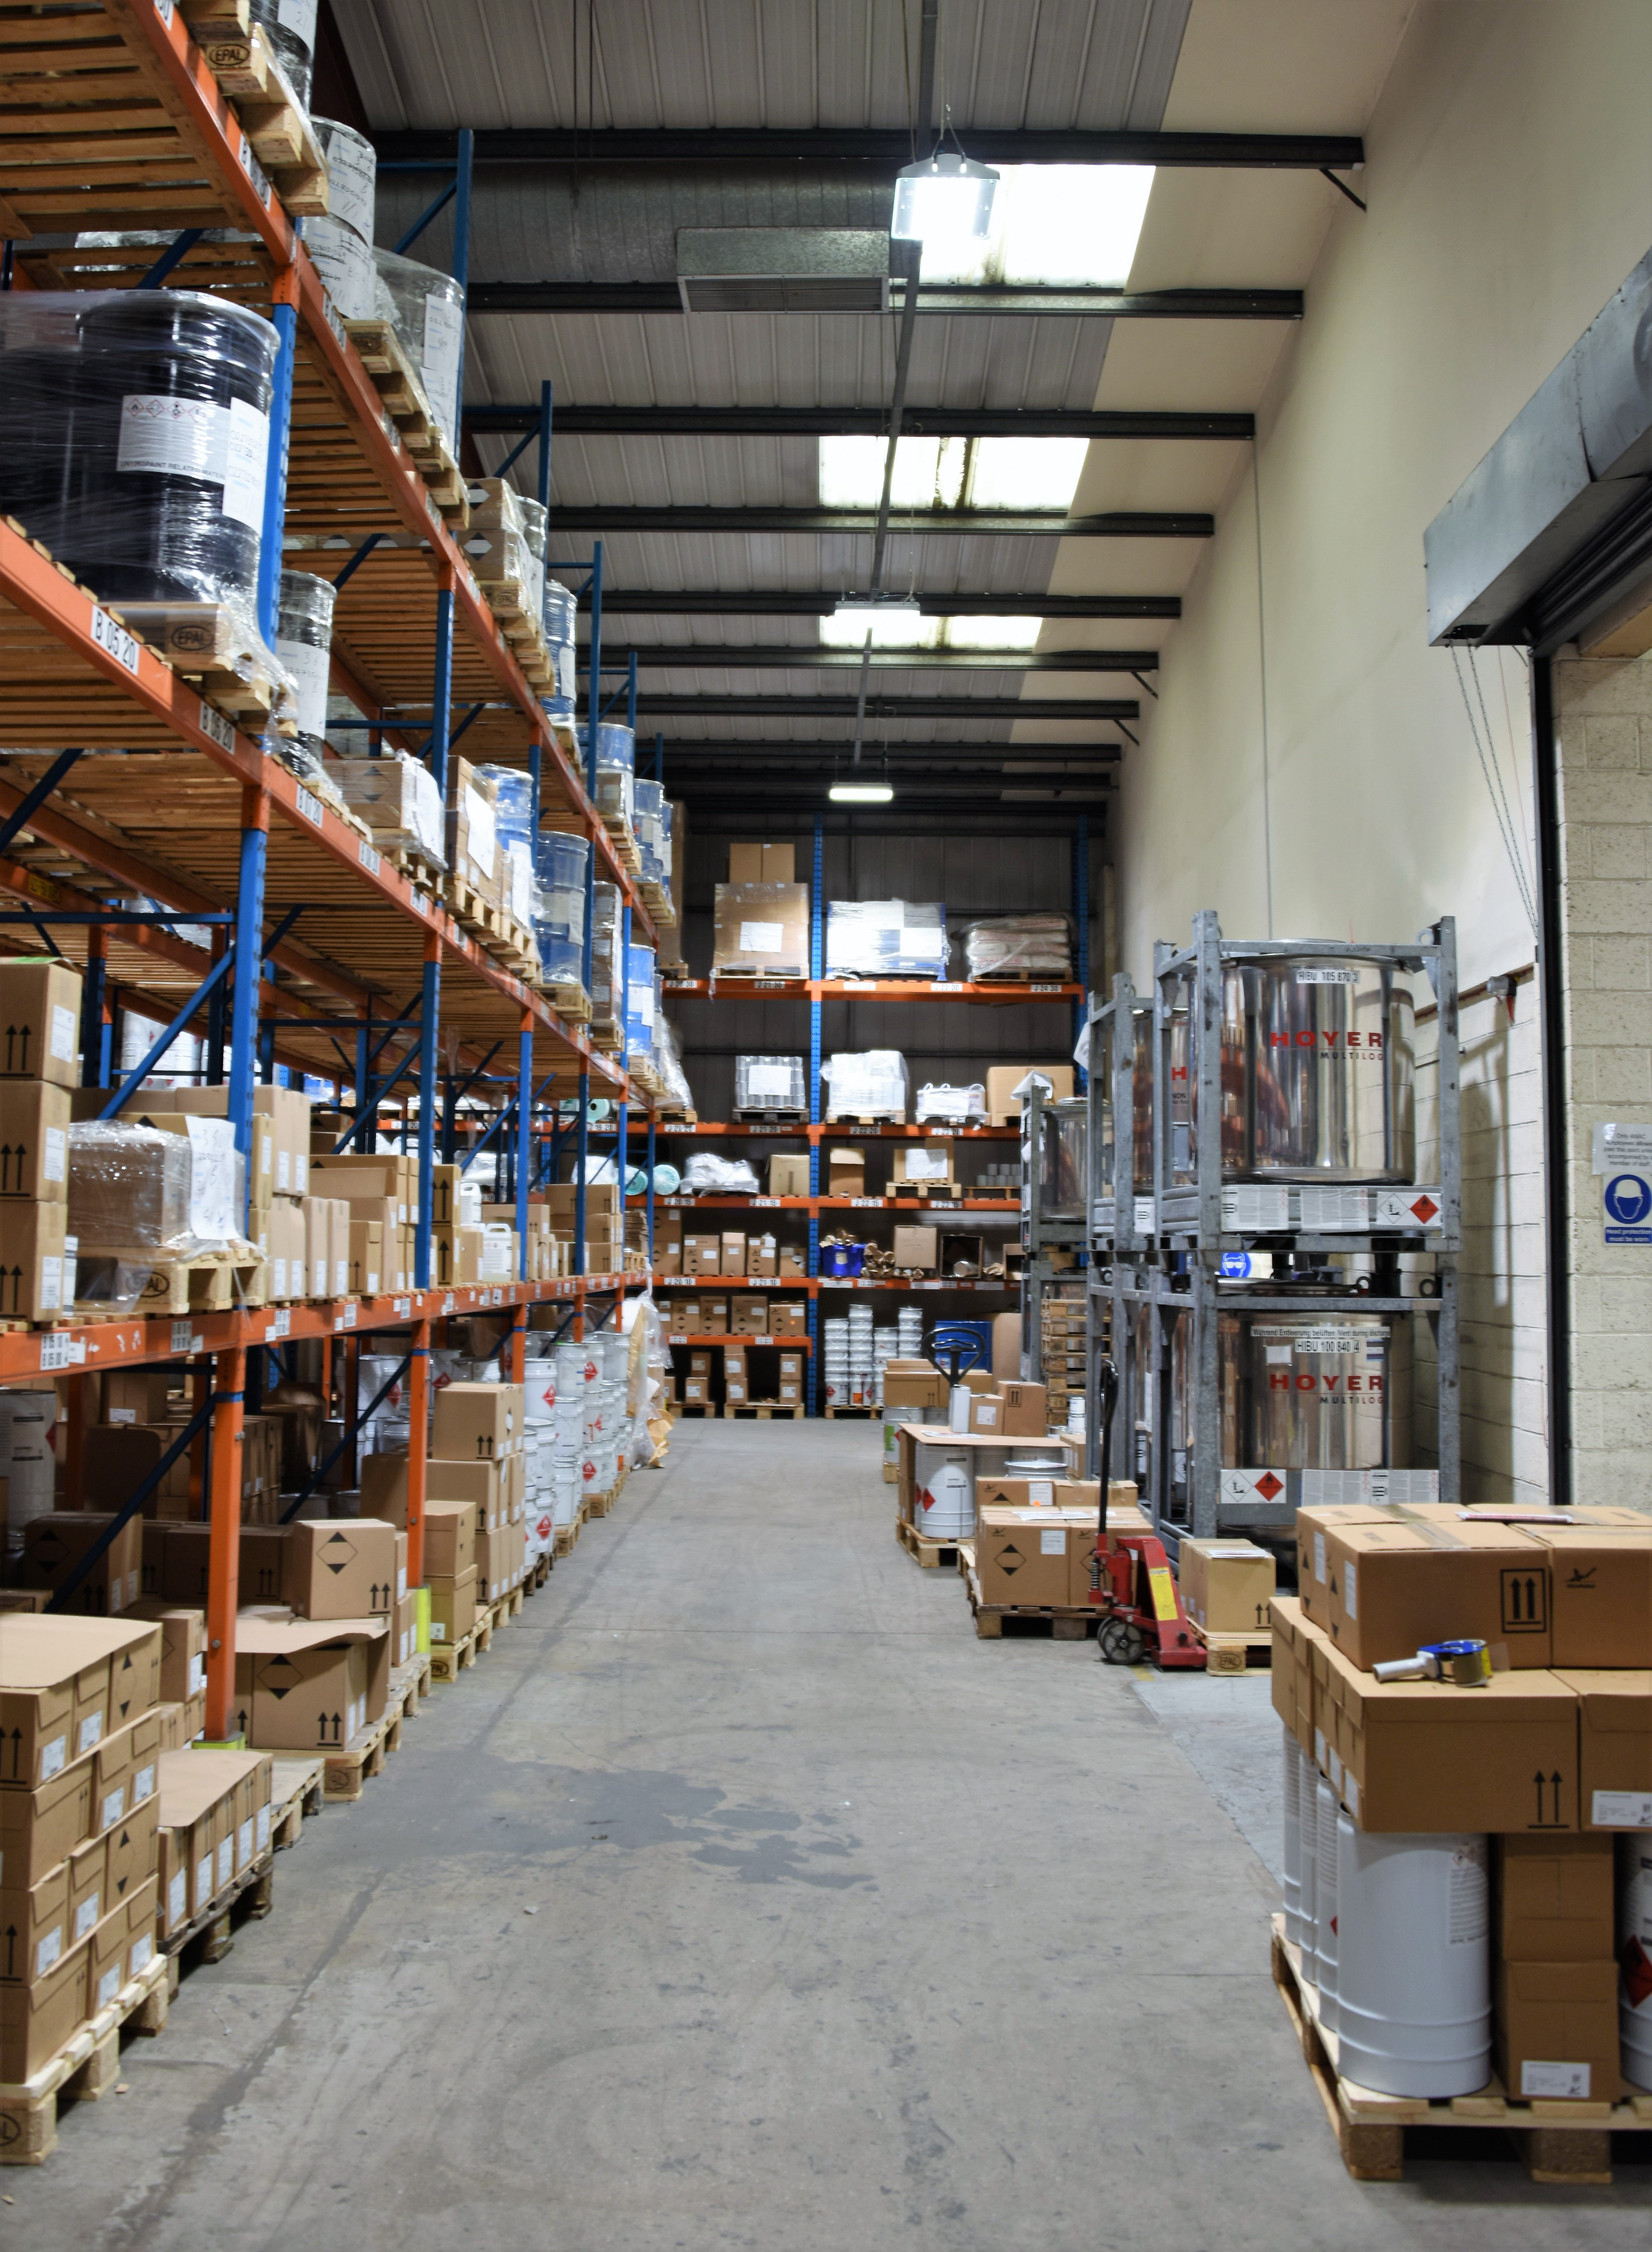 LED lighting in an industrial storage area